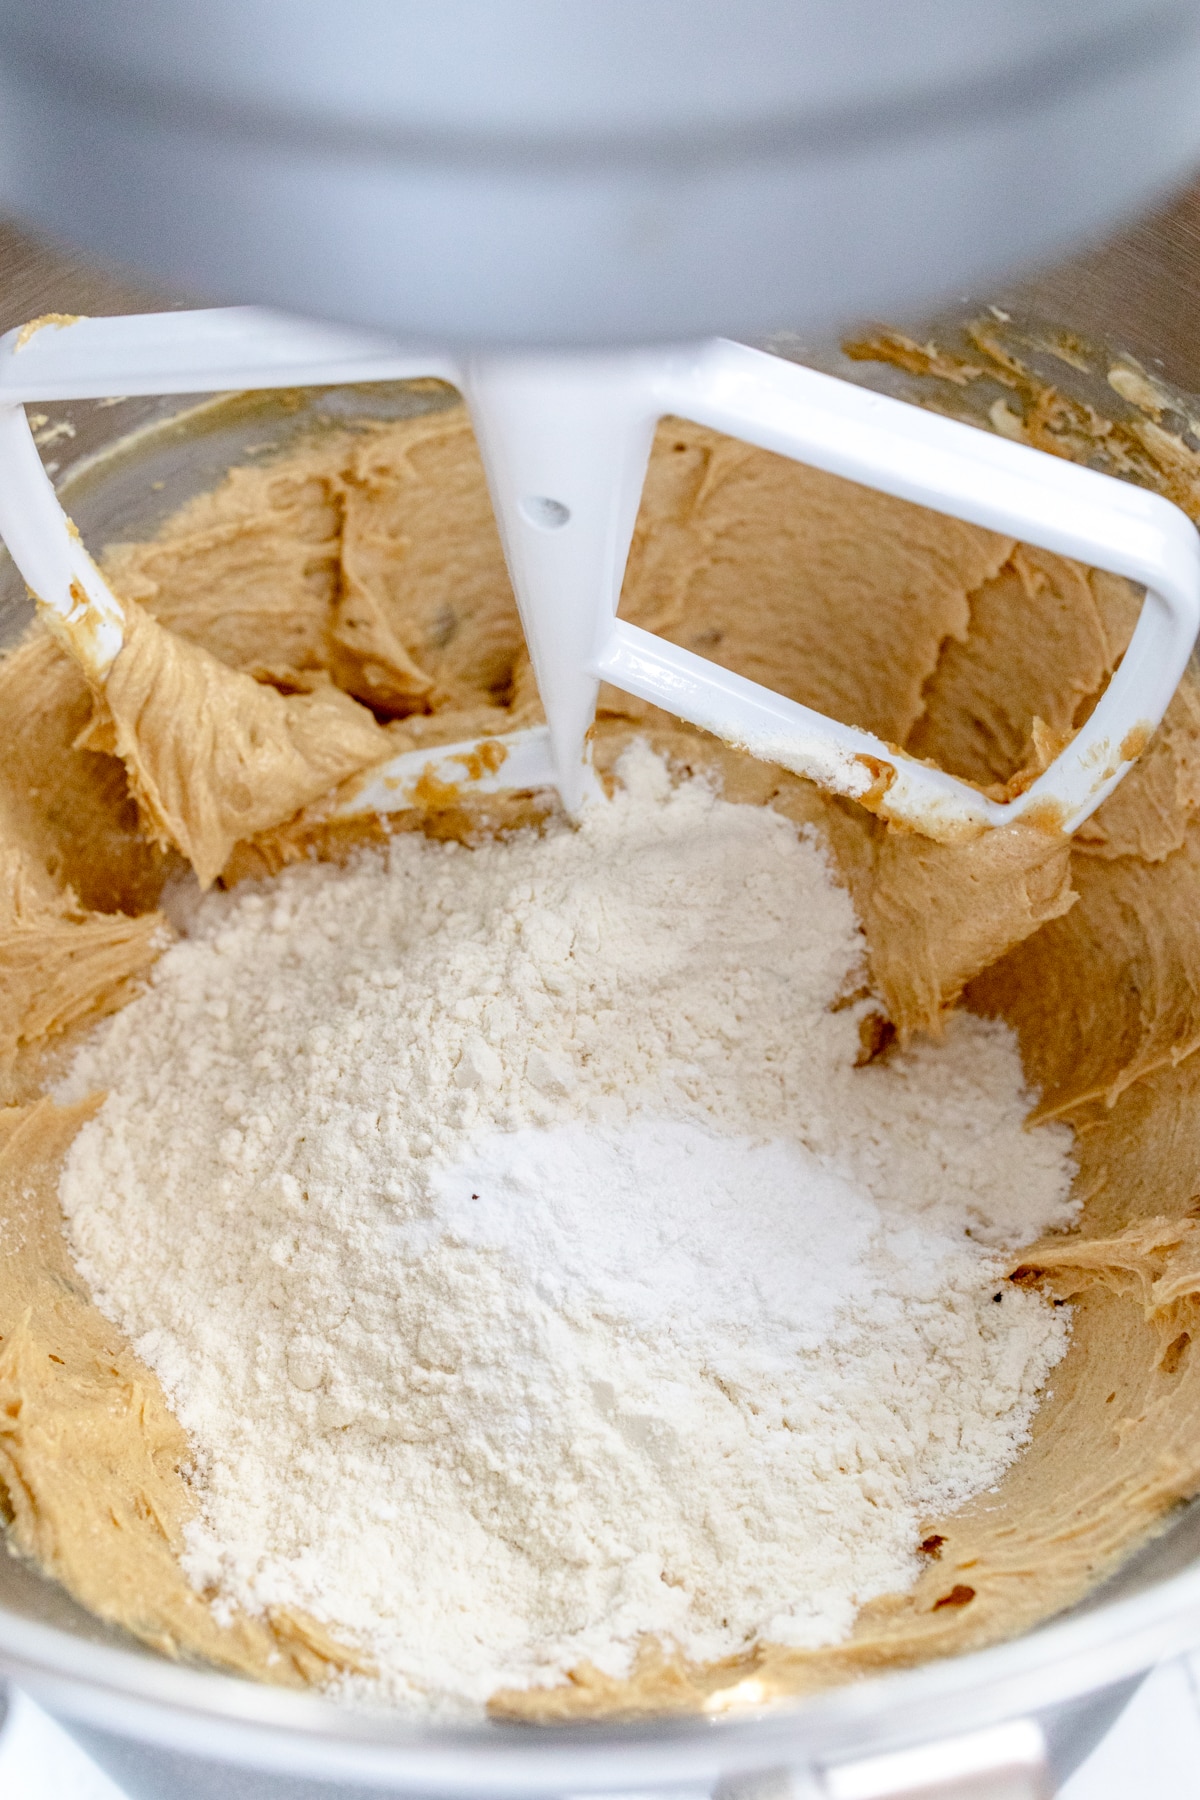 Close up of the bowl of a stand mixer with dry and wet ingredients ready to be mixed together with a paddle attachment.